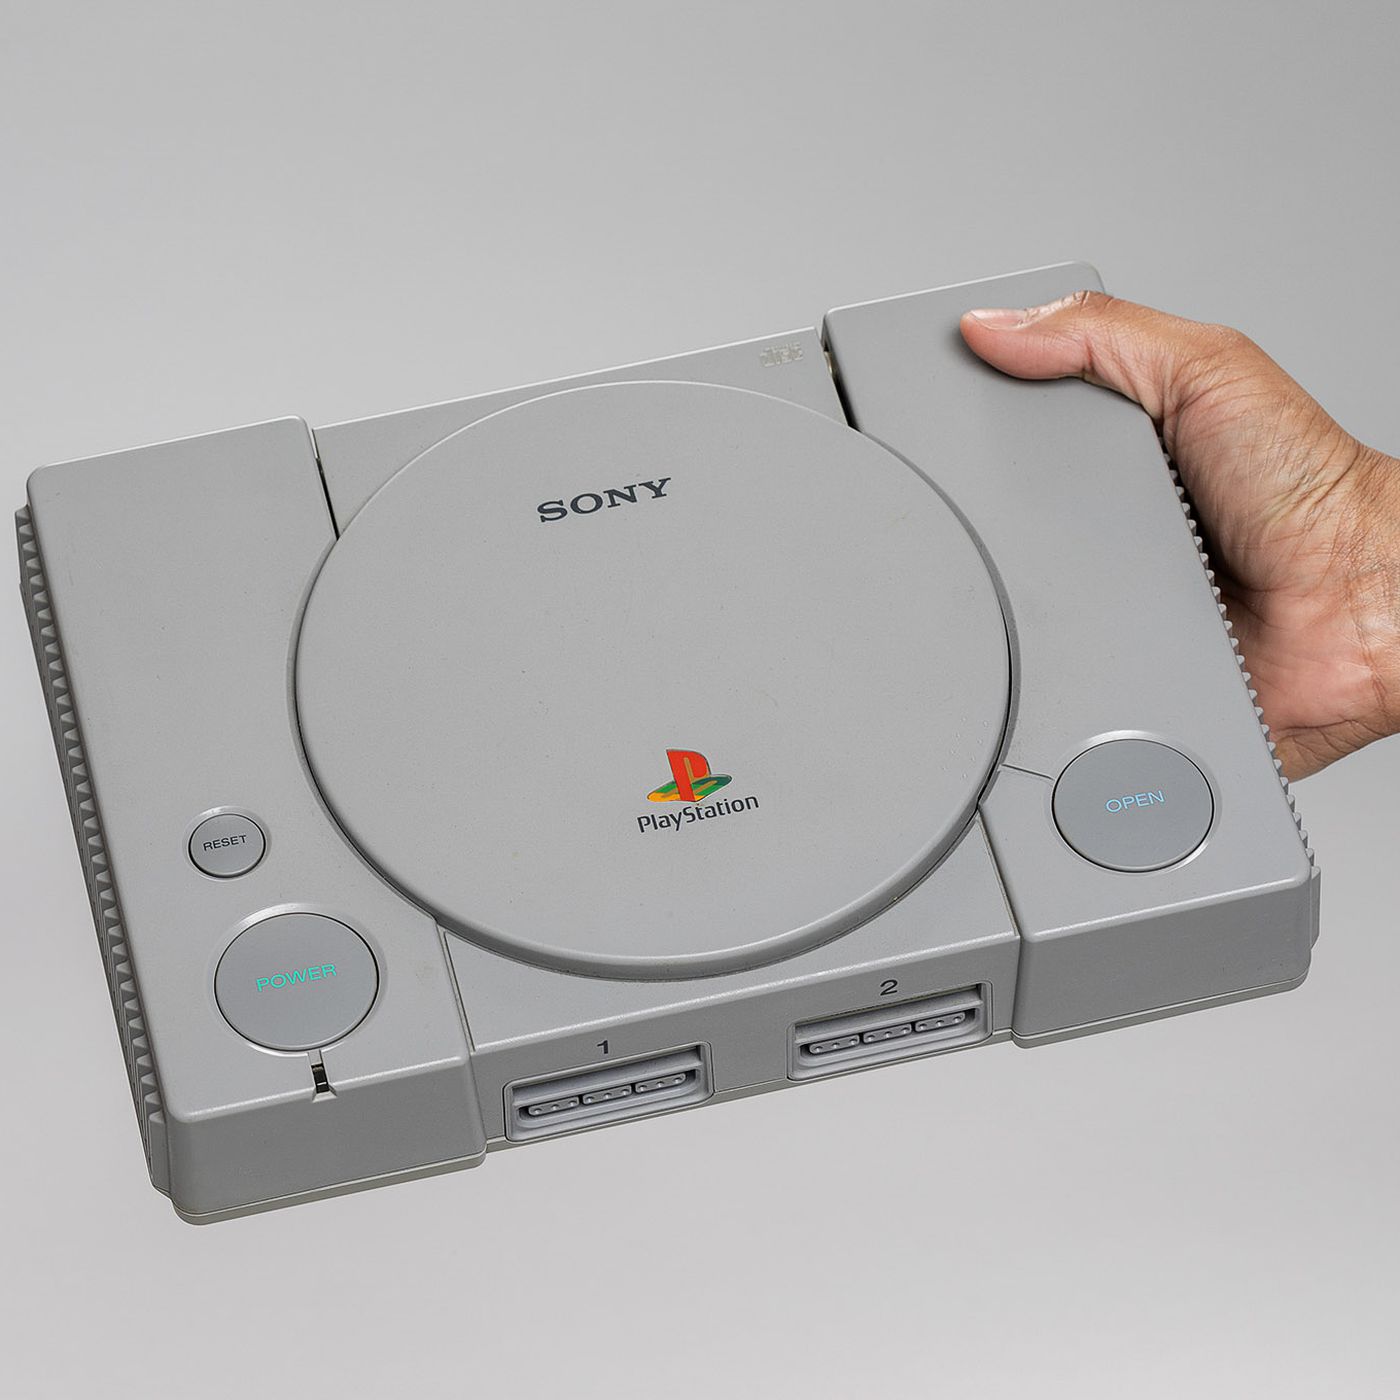 Where Was The Playstation Made